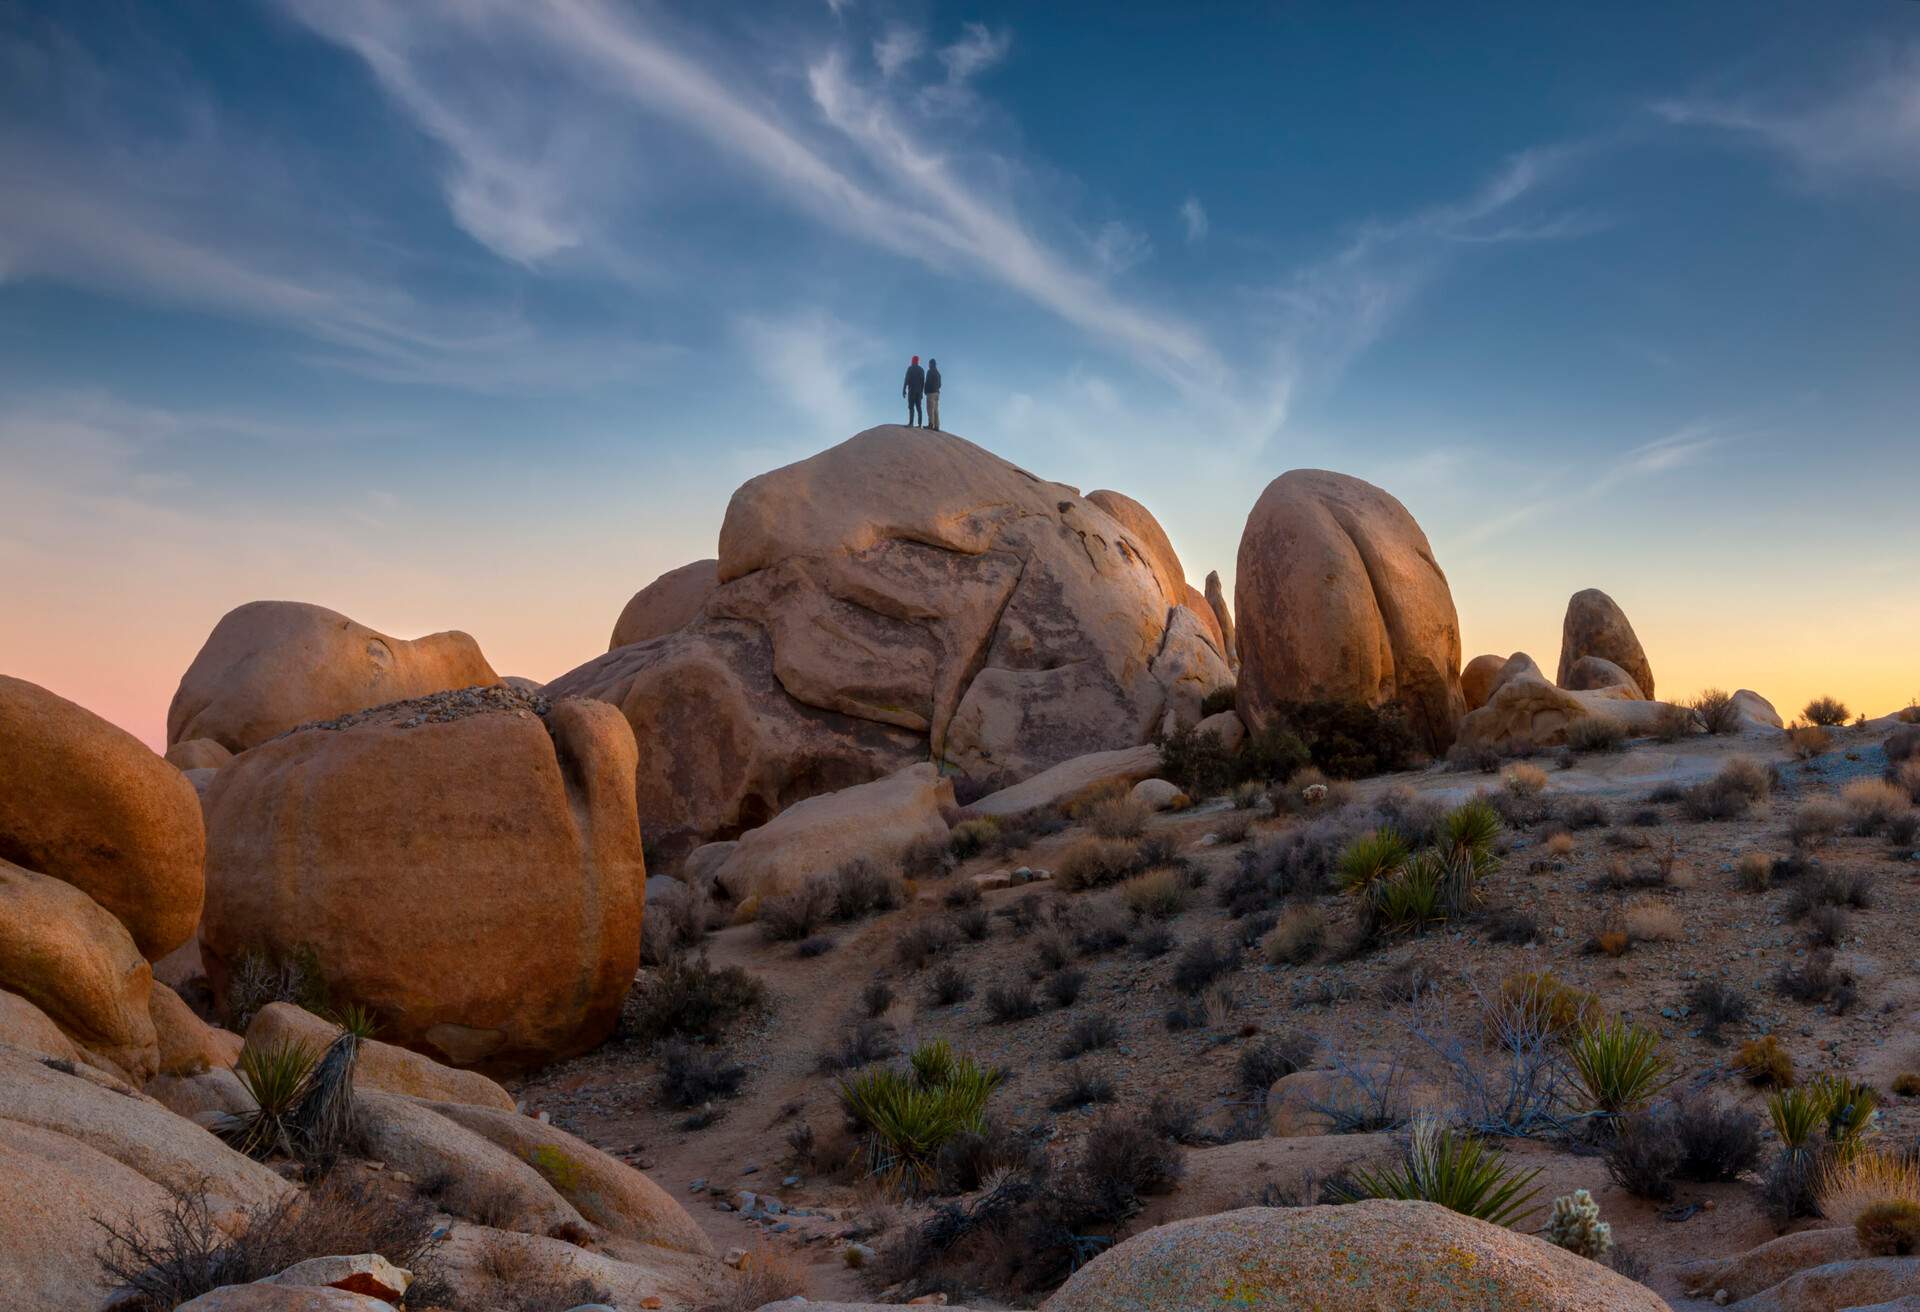 Two campers enjoying the late afternoon view from Joshua Tree National Park.